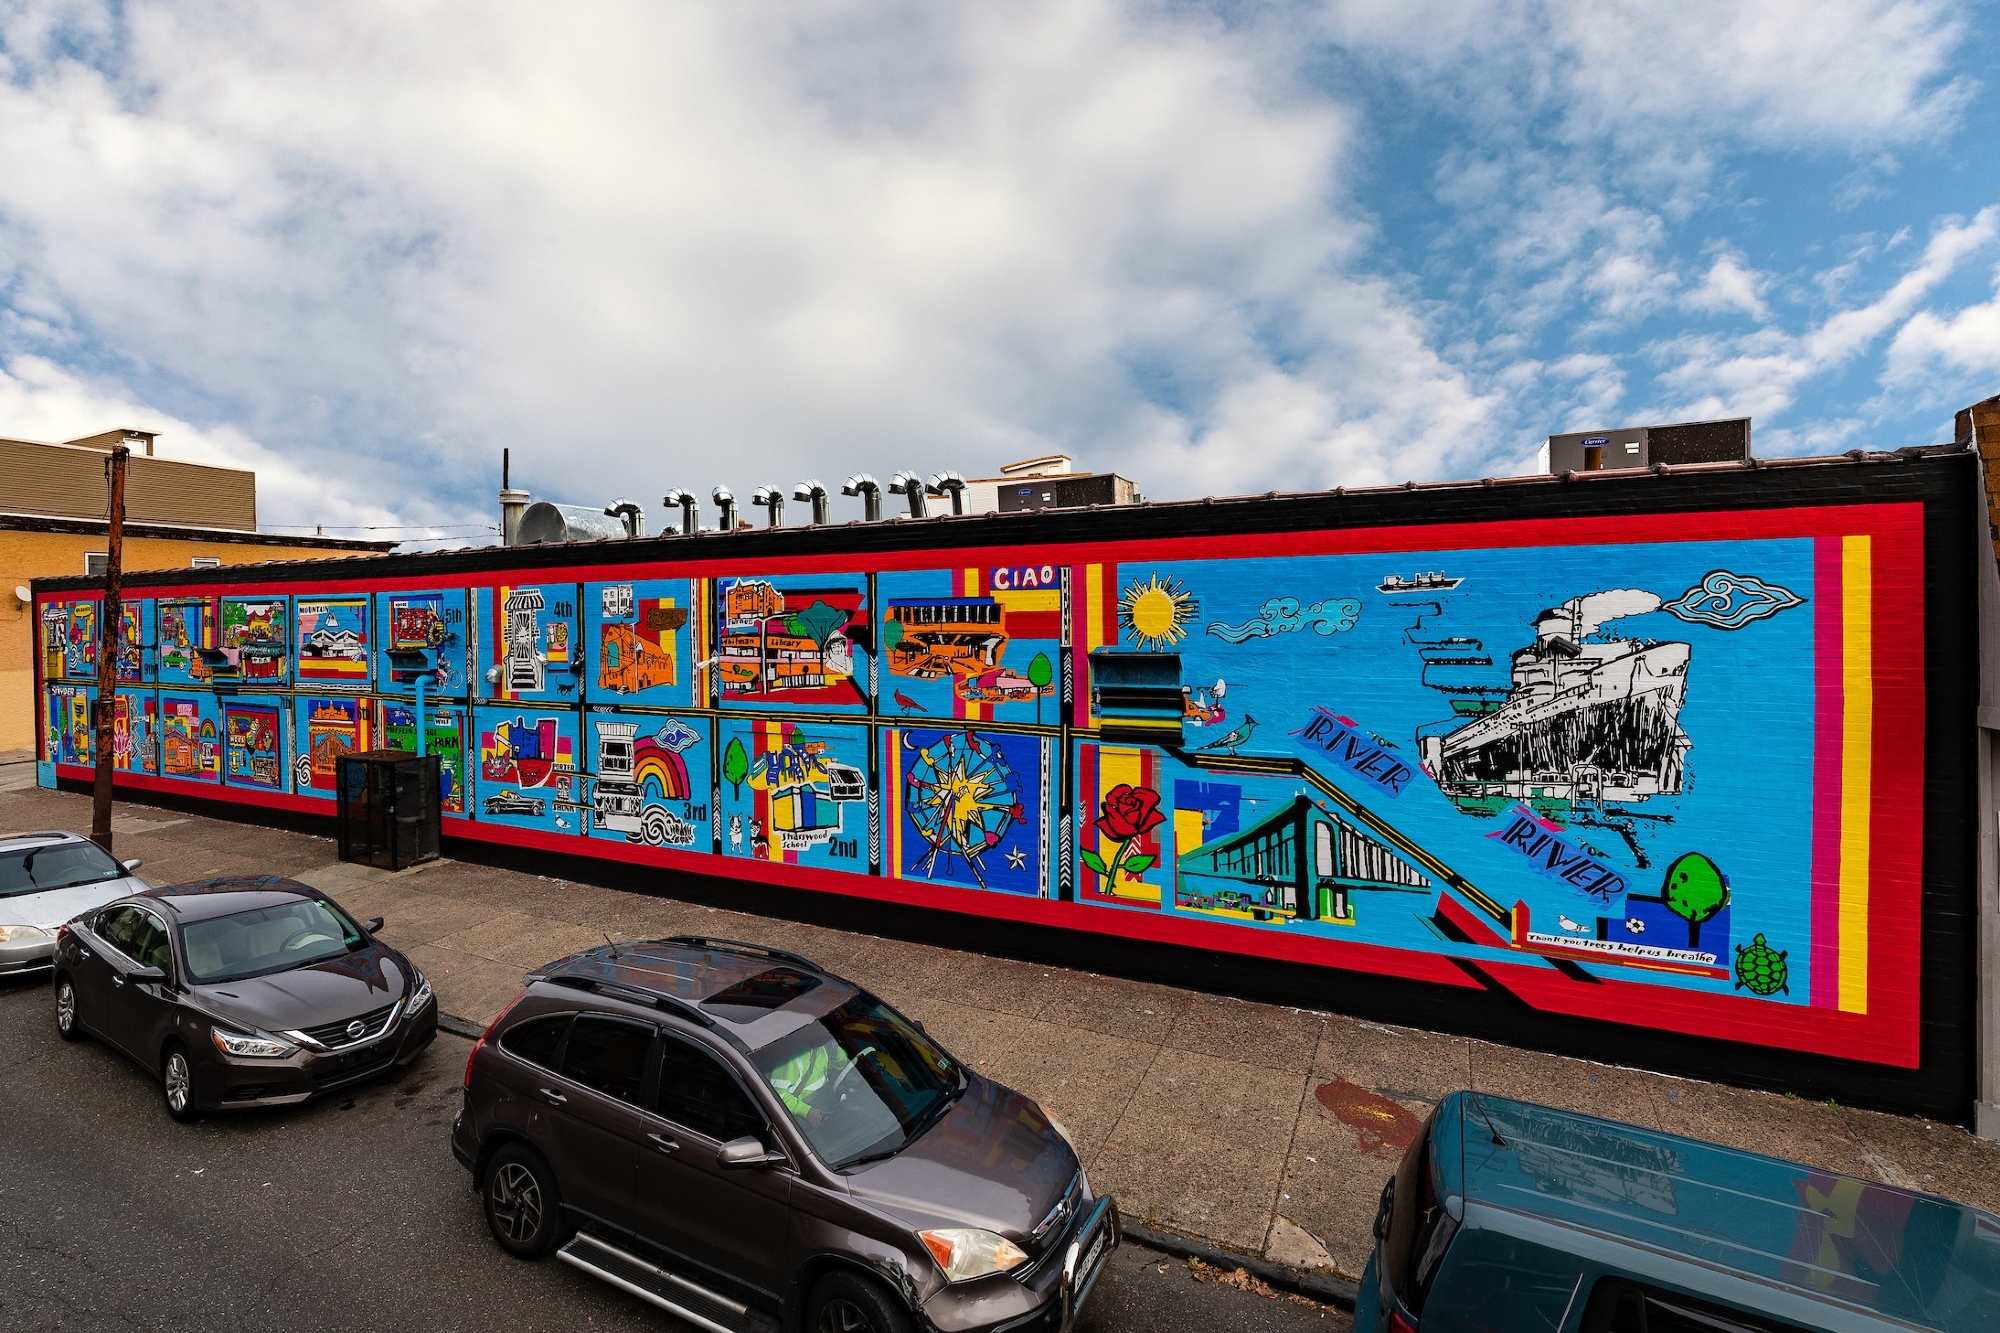 mural with many illustrations in bright colors on a long wall with a sidewalk and cars